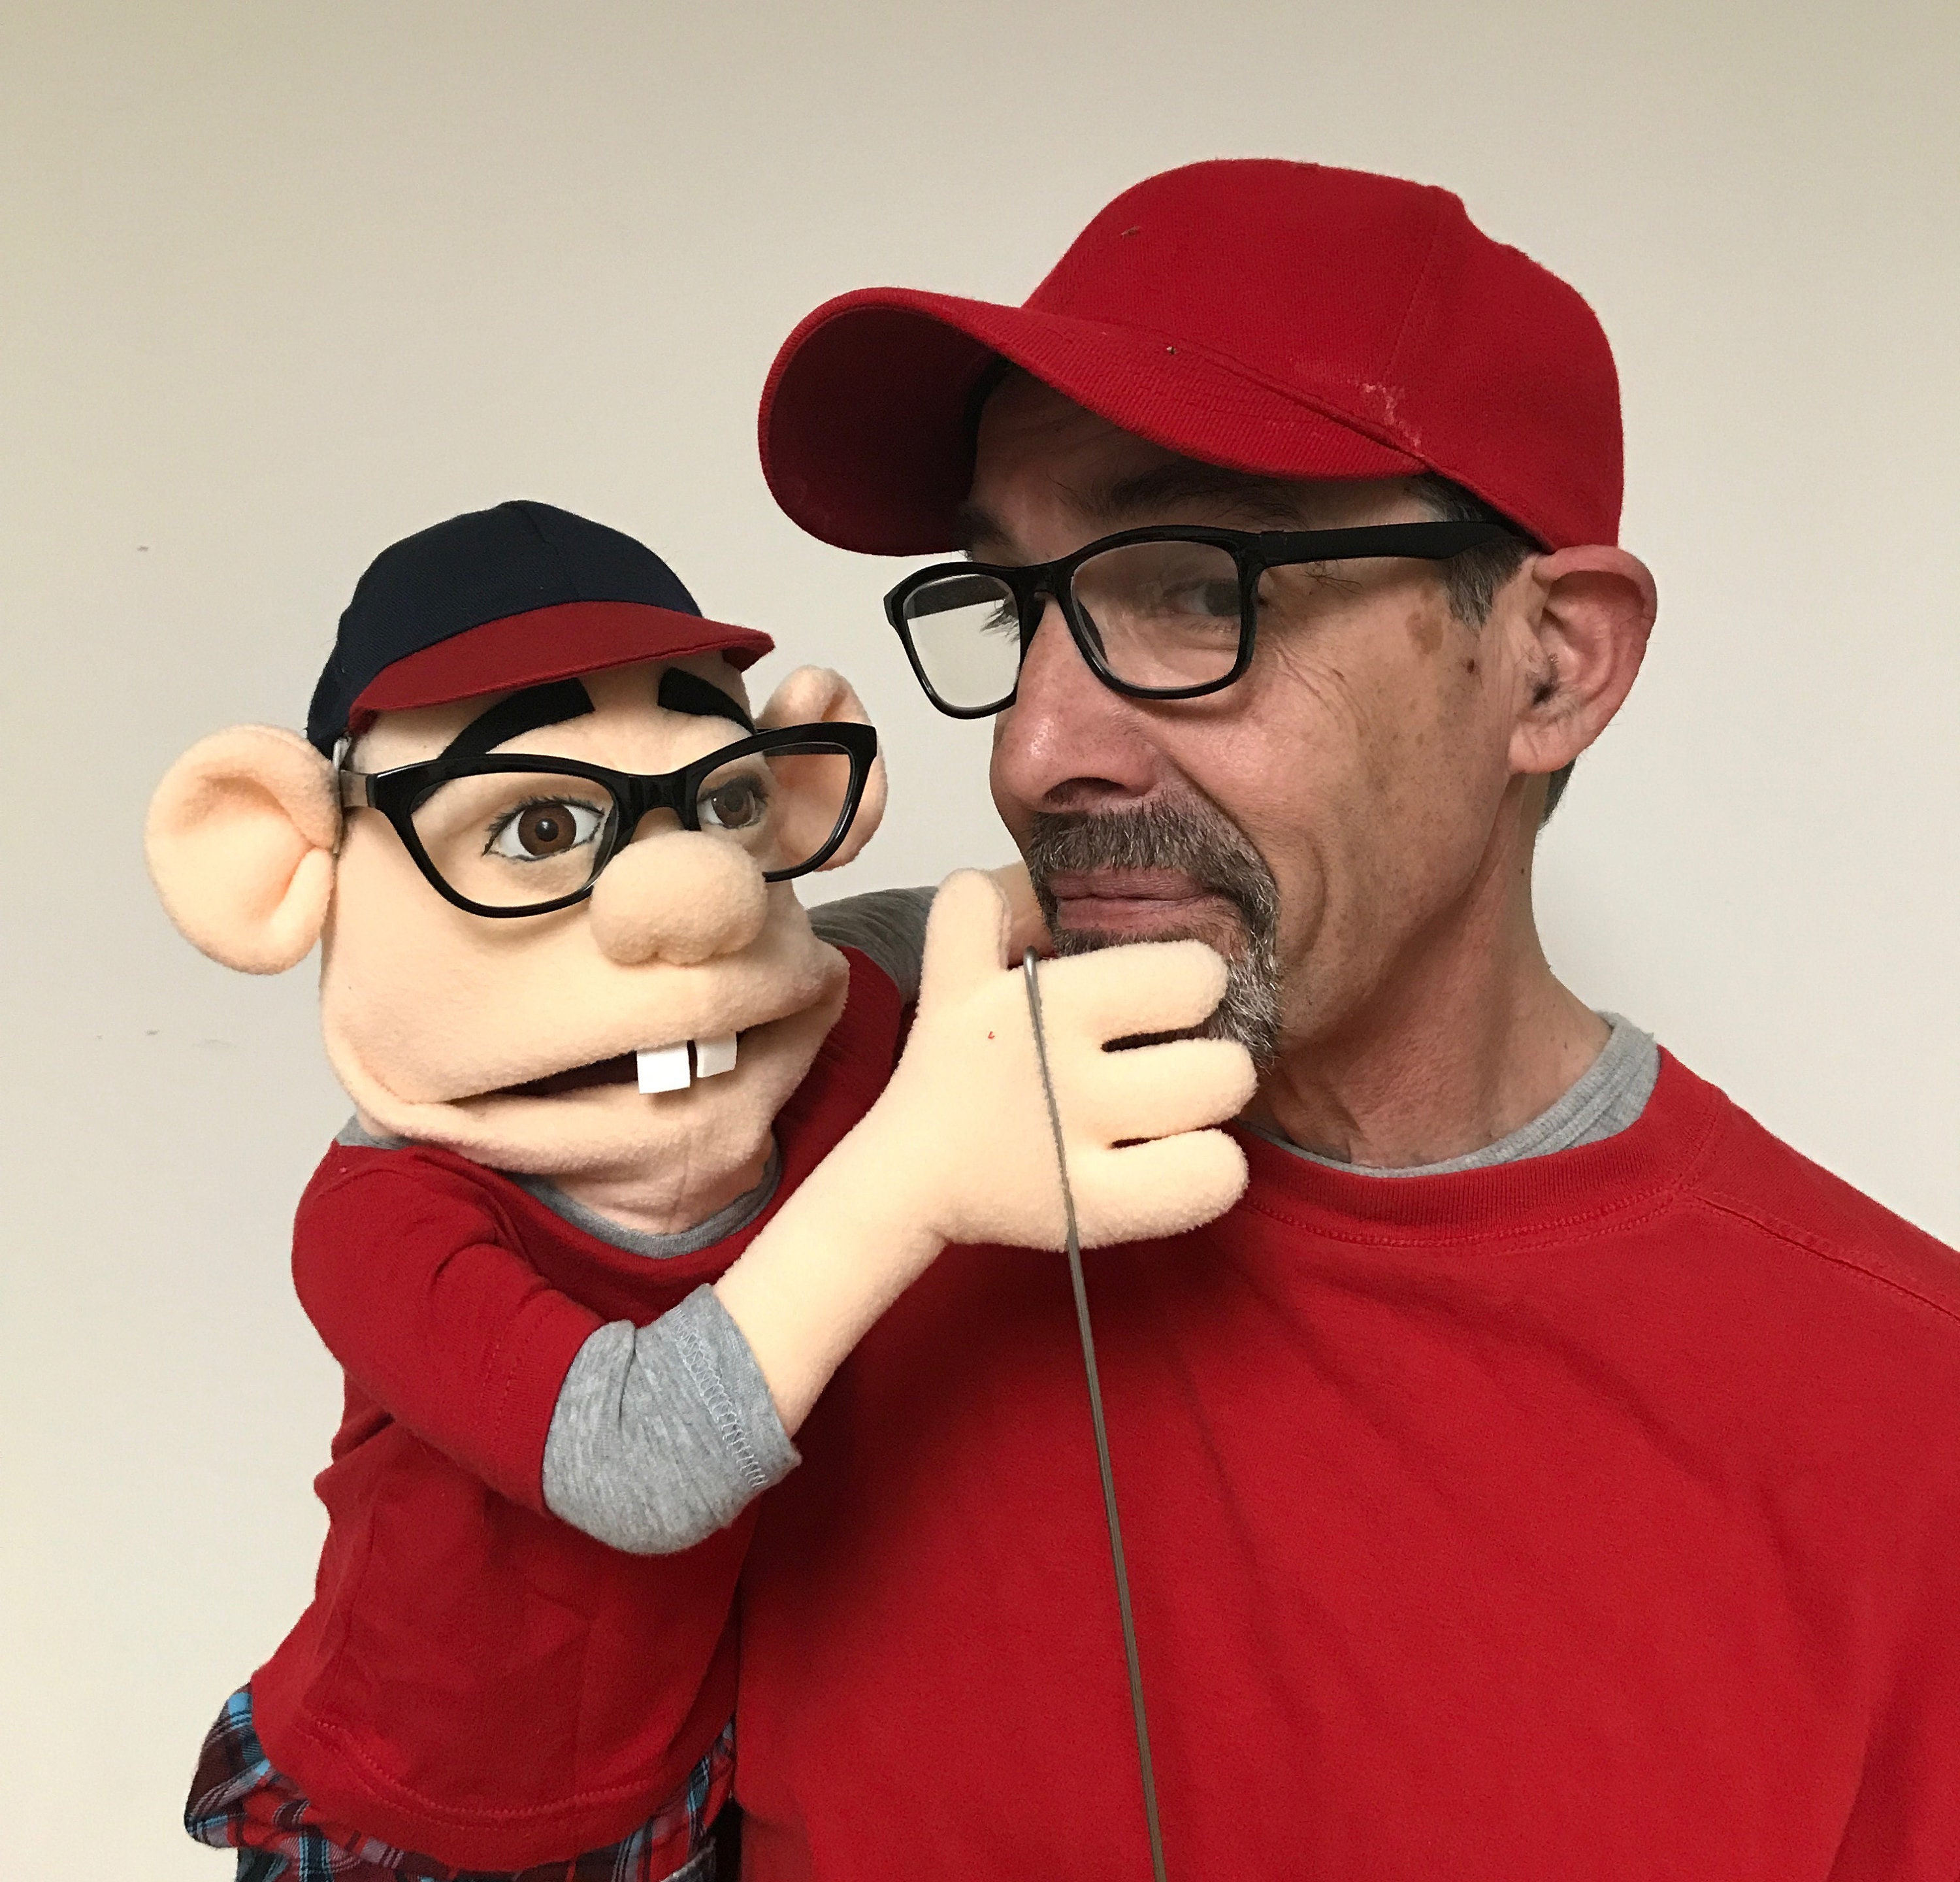 Custom Look alike puppet great gift for muppet lovers and Jeffy fans ...